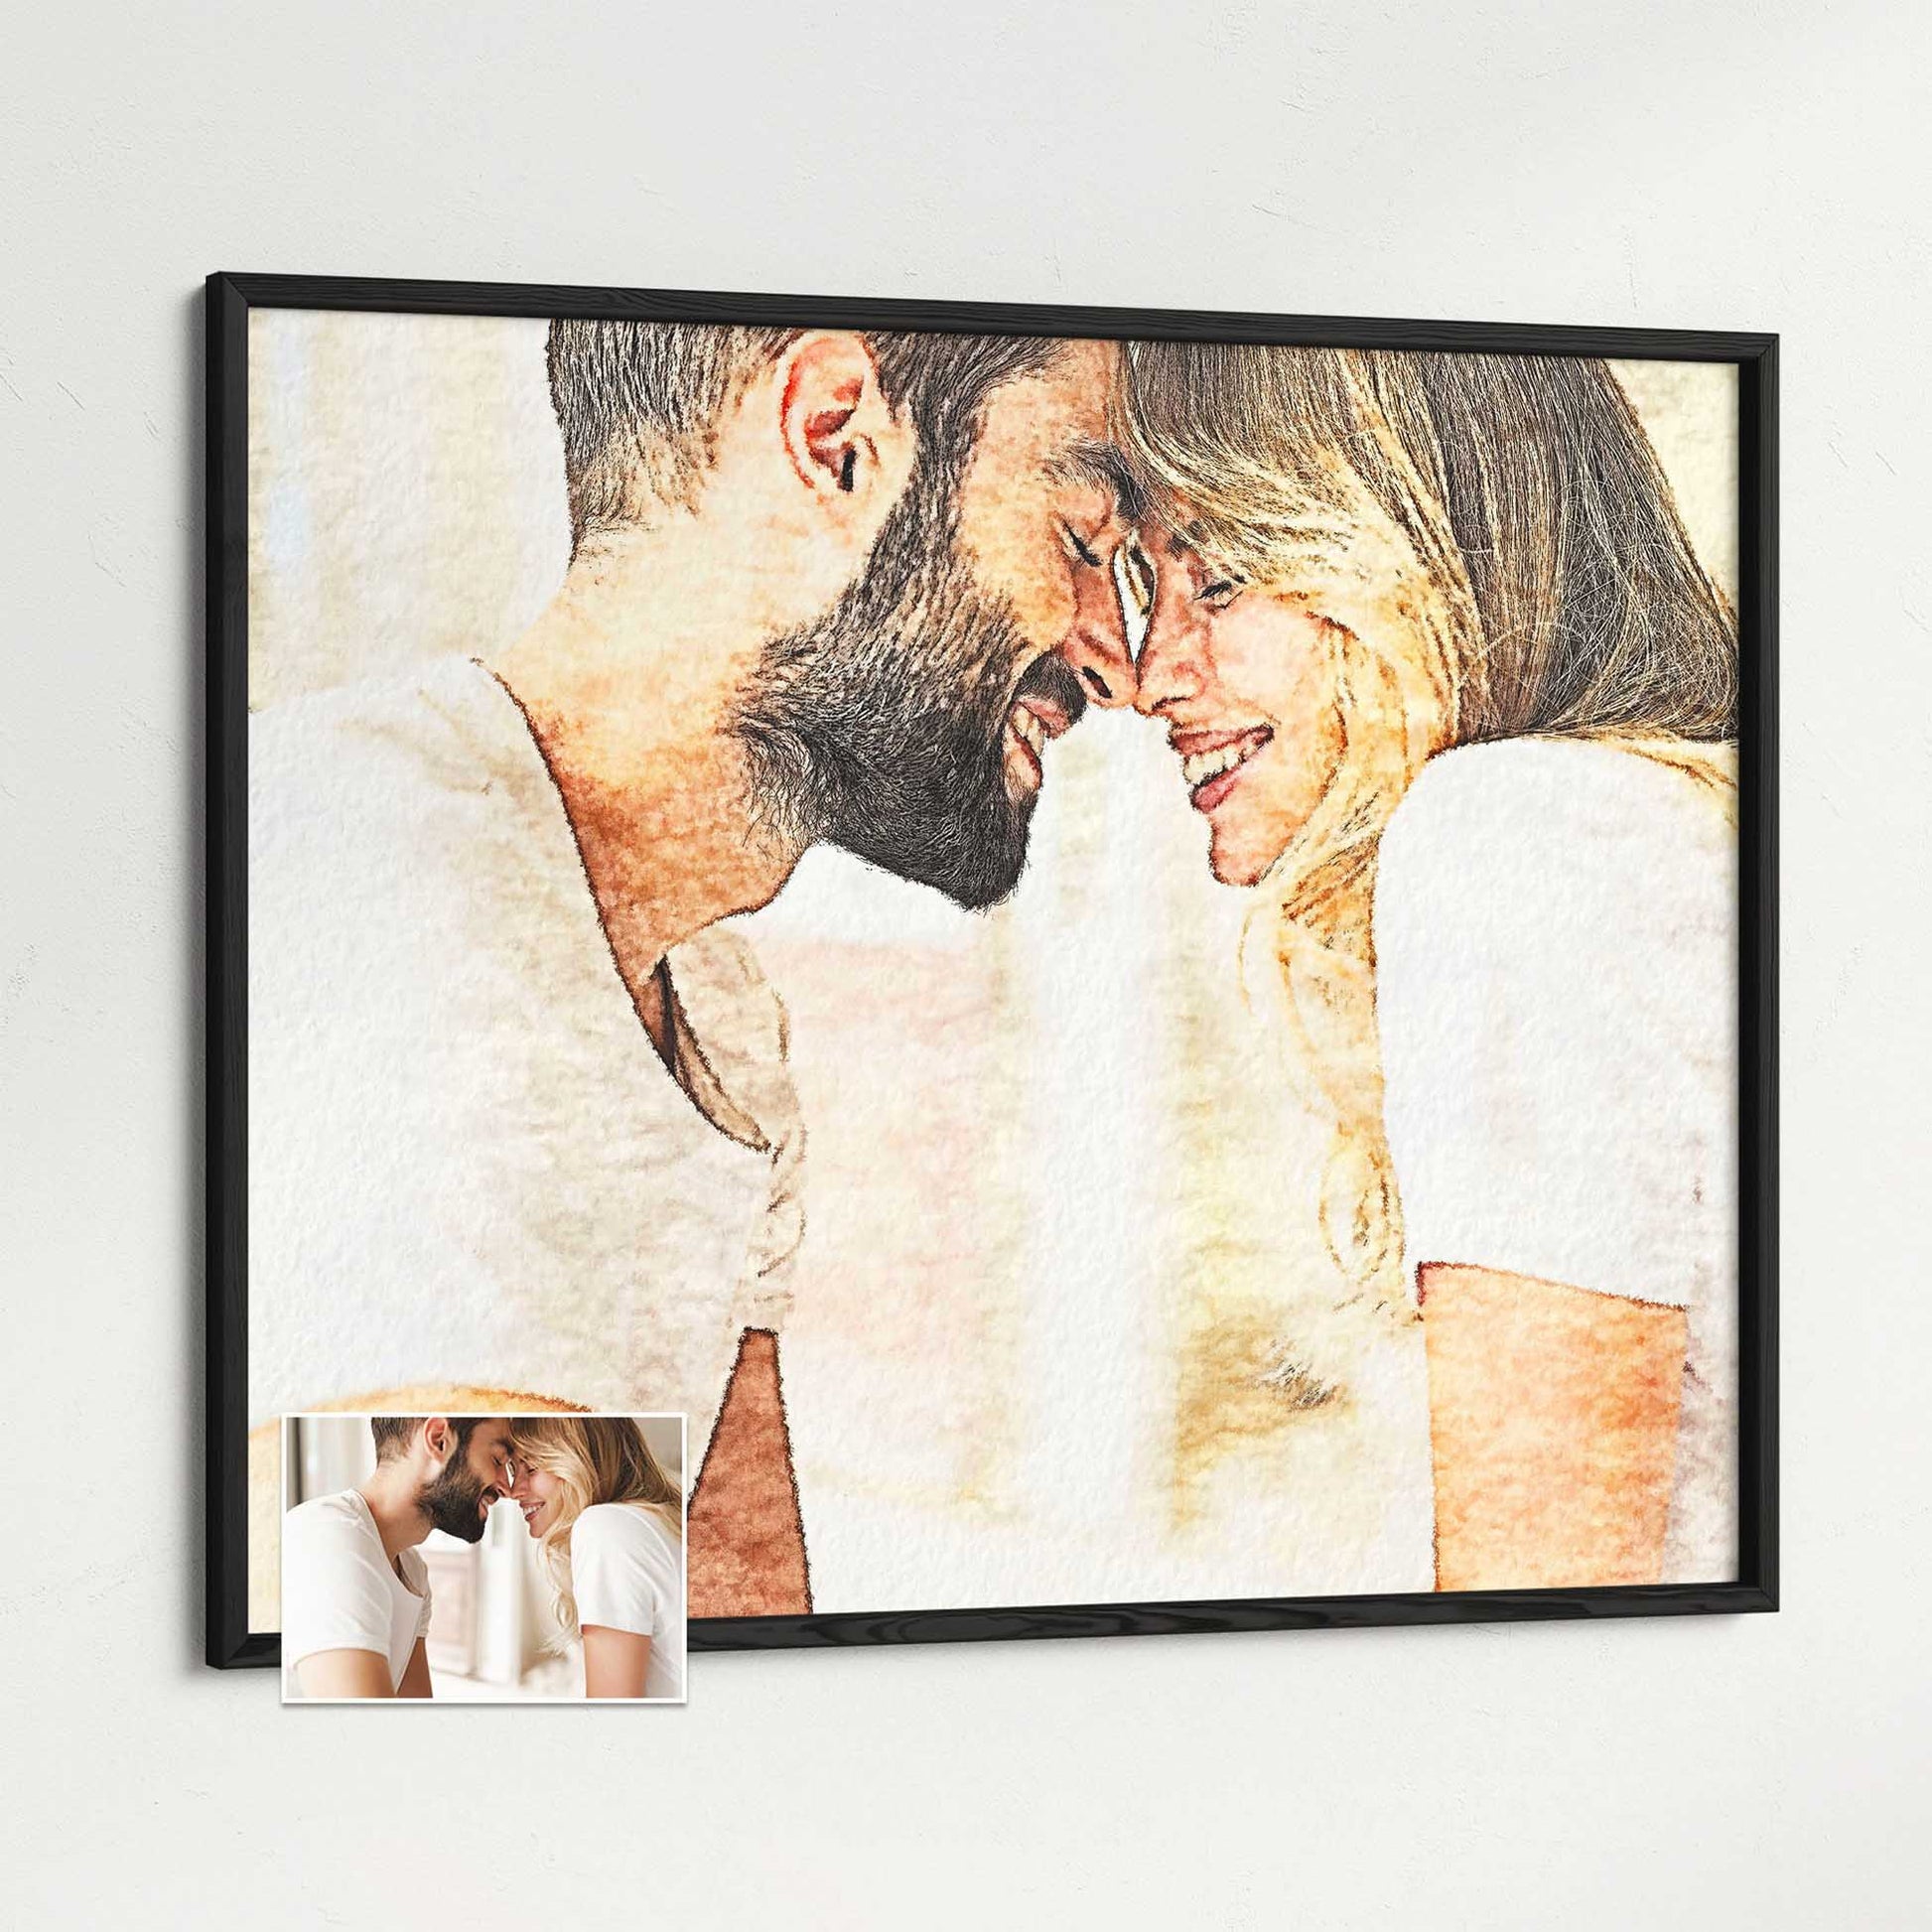 Capture precious memories with a Personalised Watercolor Painting Framed Print. Turn your cherished photo into a captivating piece of art that showcases your unique style. This versatile accessory adds a personalized touch to your home